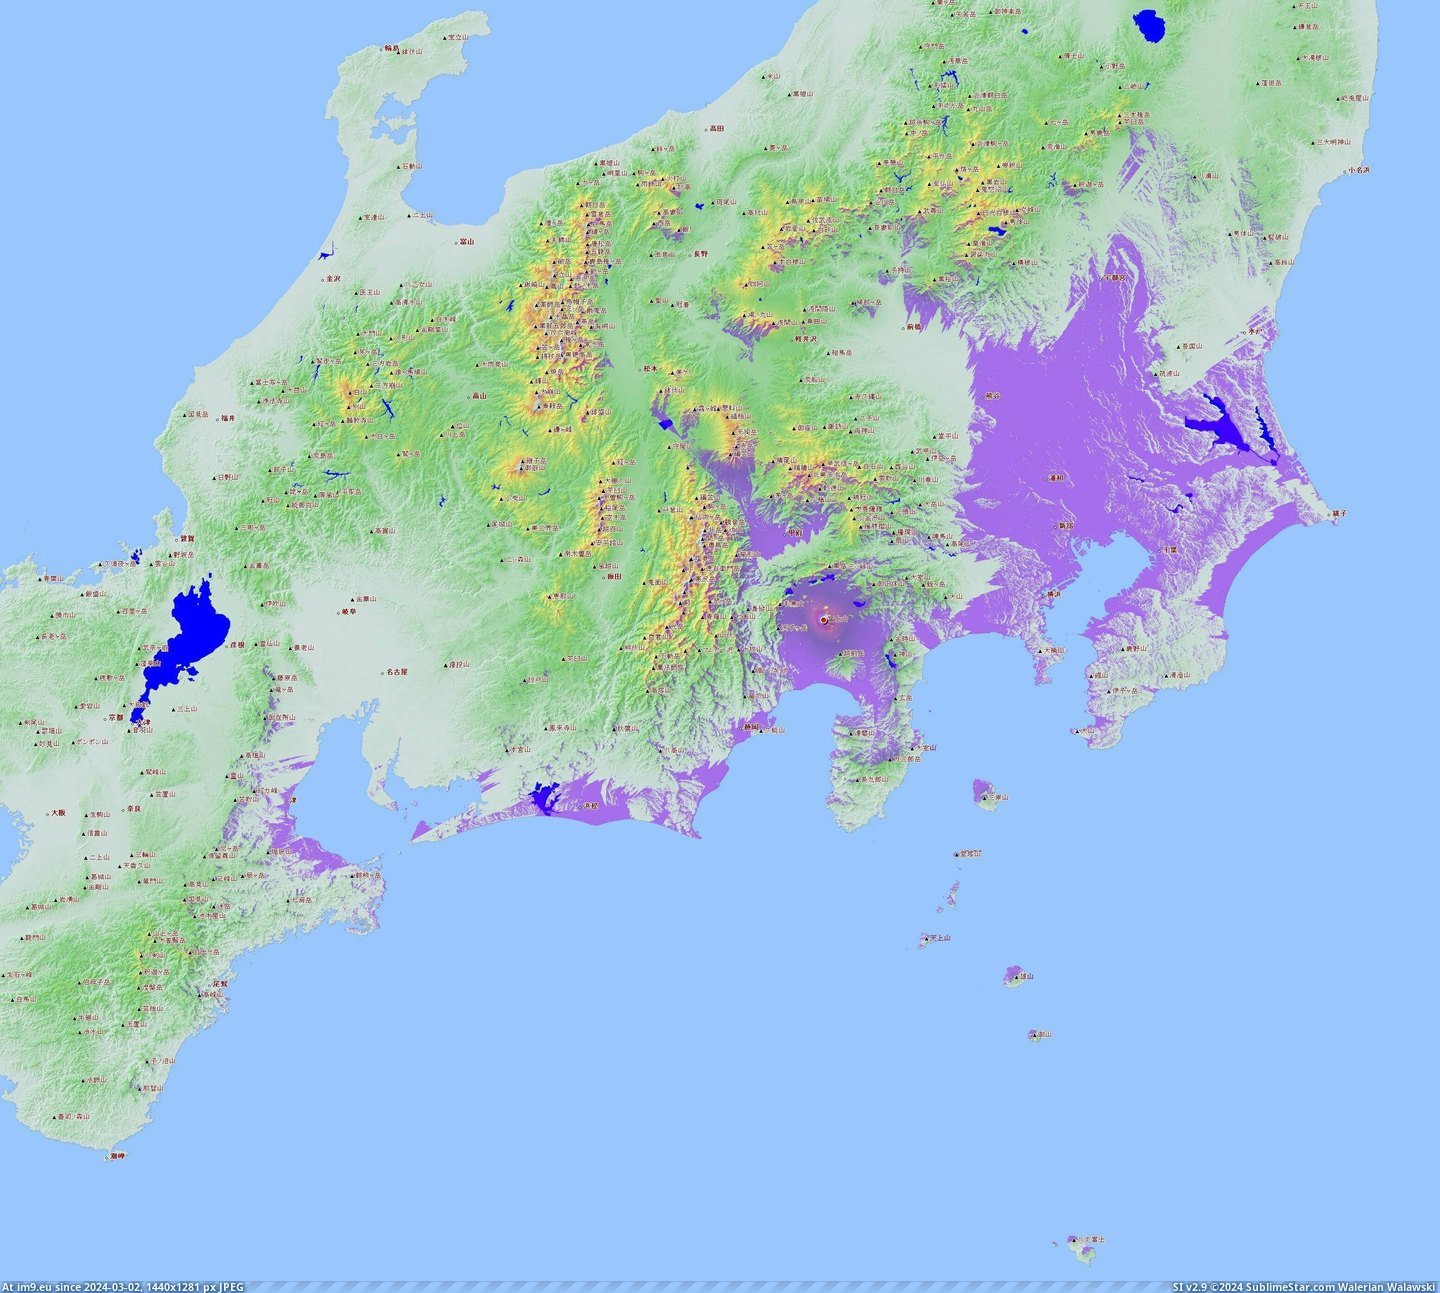 #Map #Japan #Shows #Fuji #Visibility #Mount #Purple #Potential [Mapporn] Map where purple shows potential visibility for Mount Fuji (japan) [3105x2774] Pic. (Image of album My r/MAPS favs))